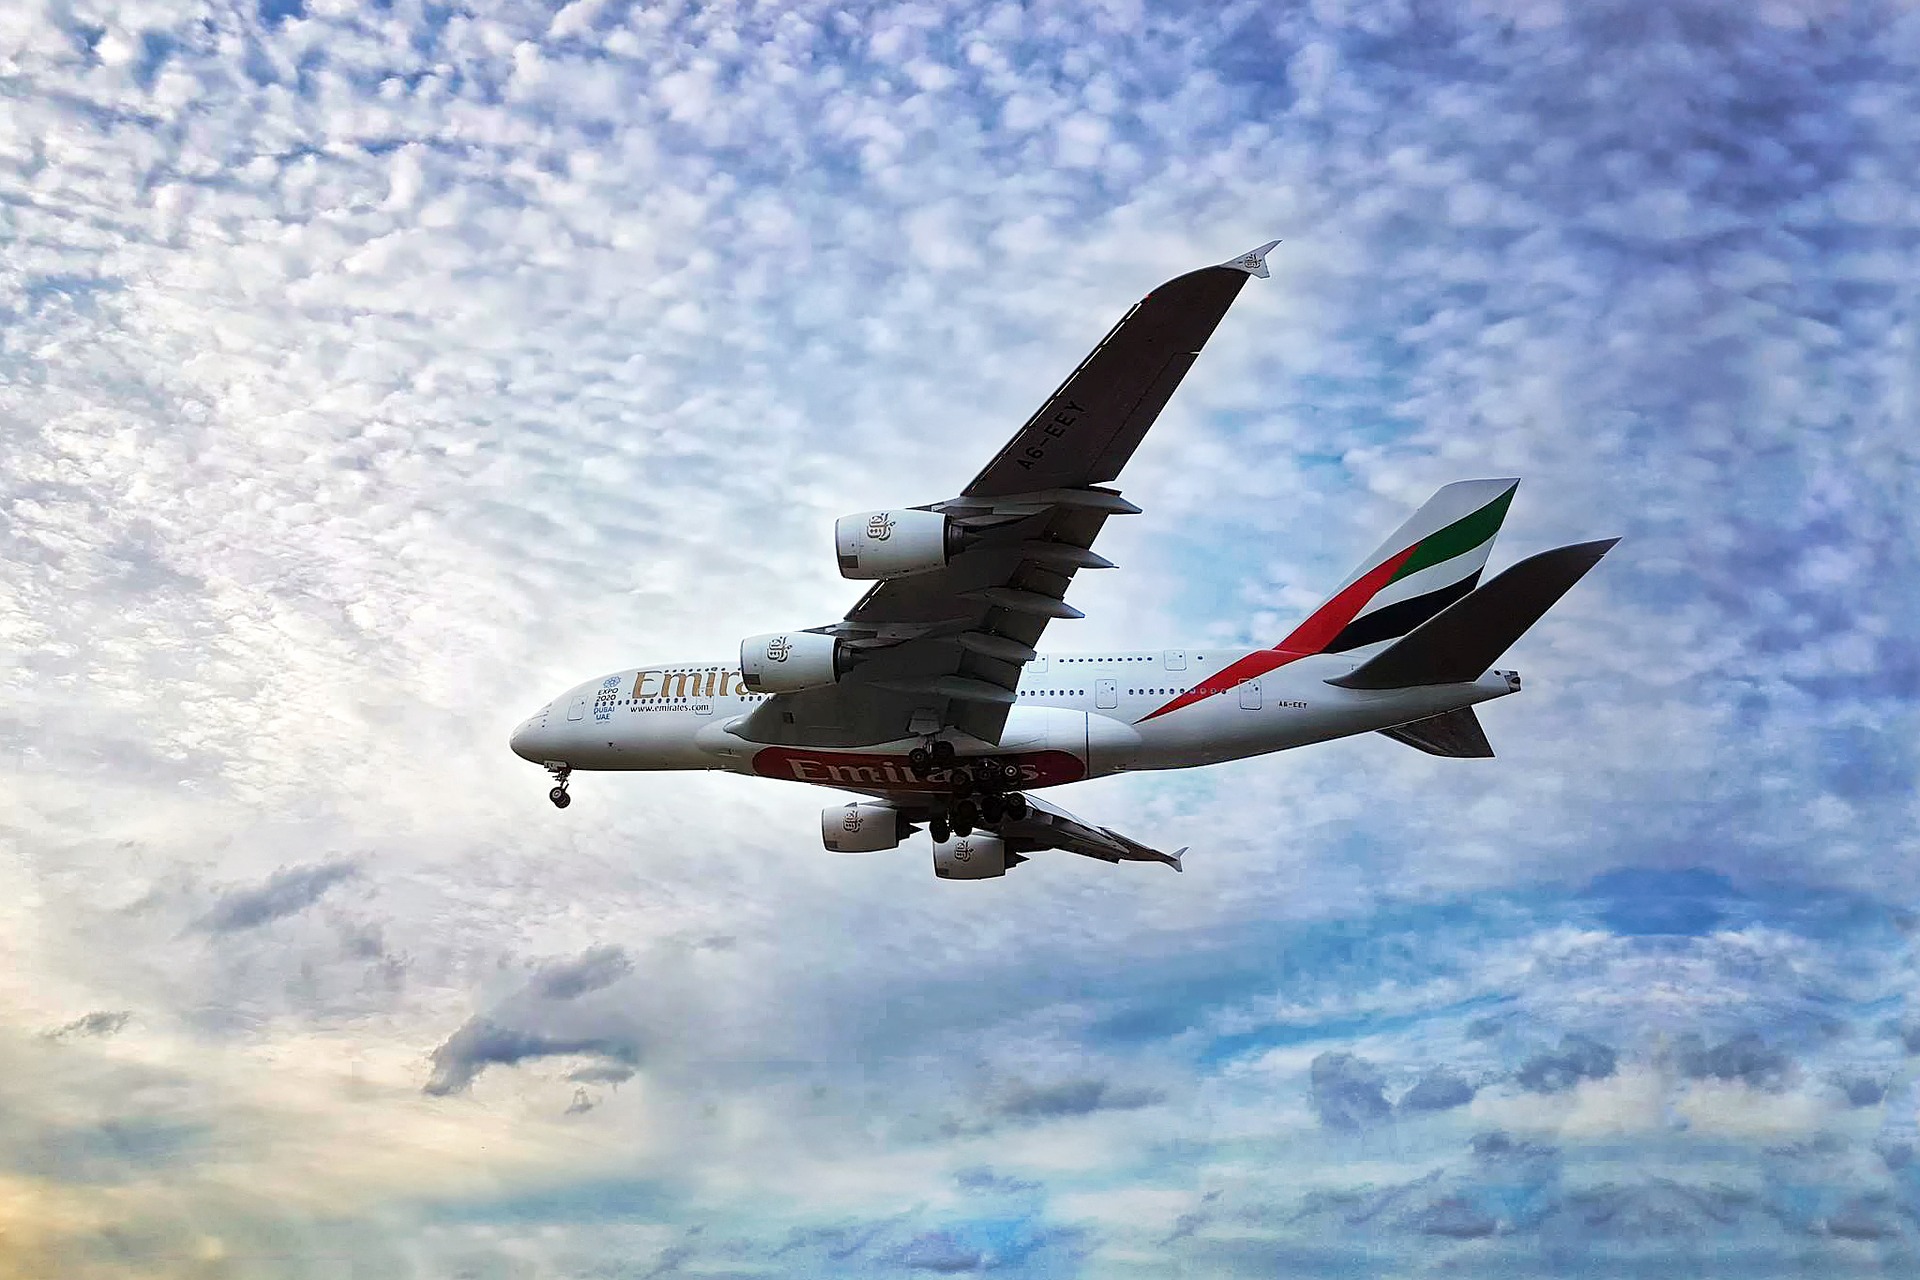 An Emirates A380 moments before landing